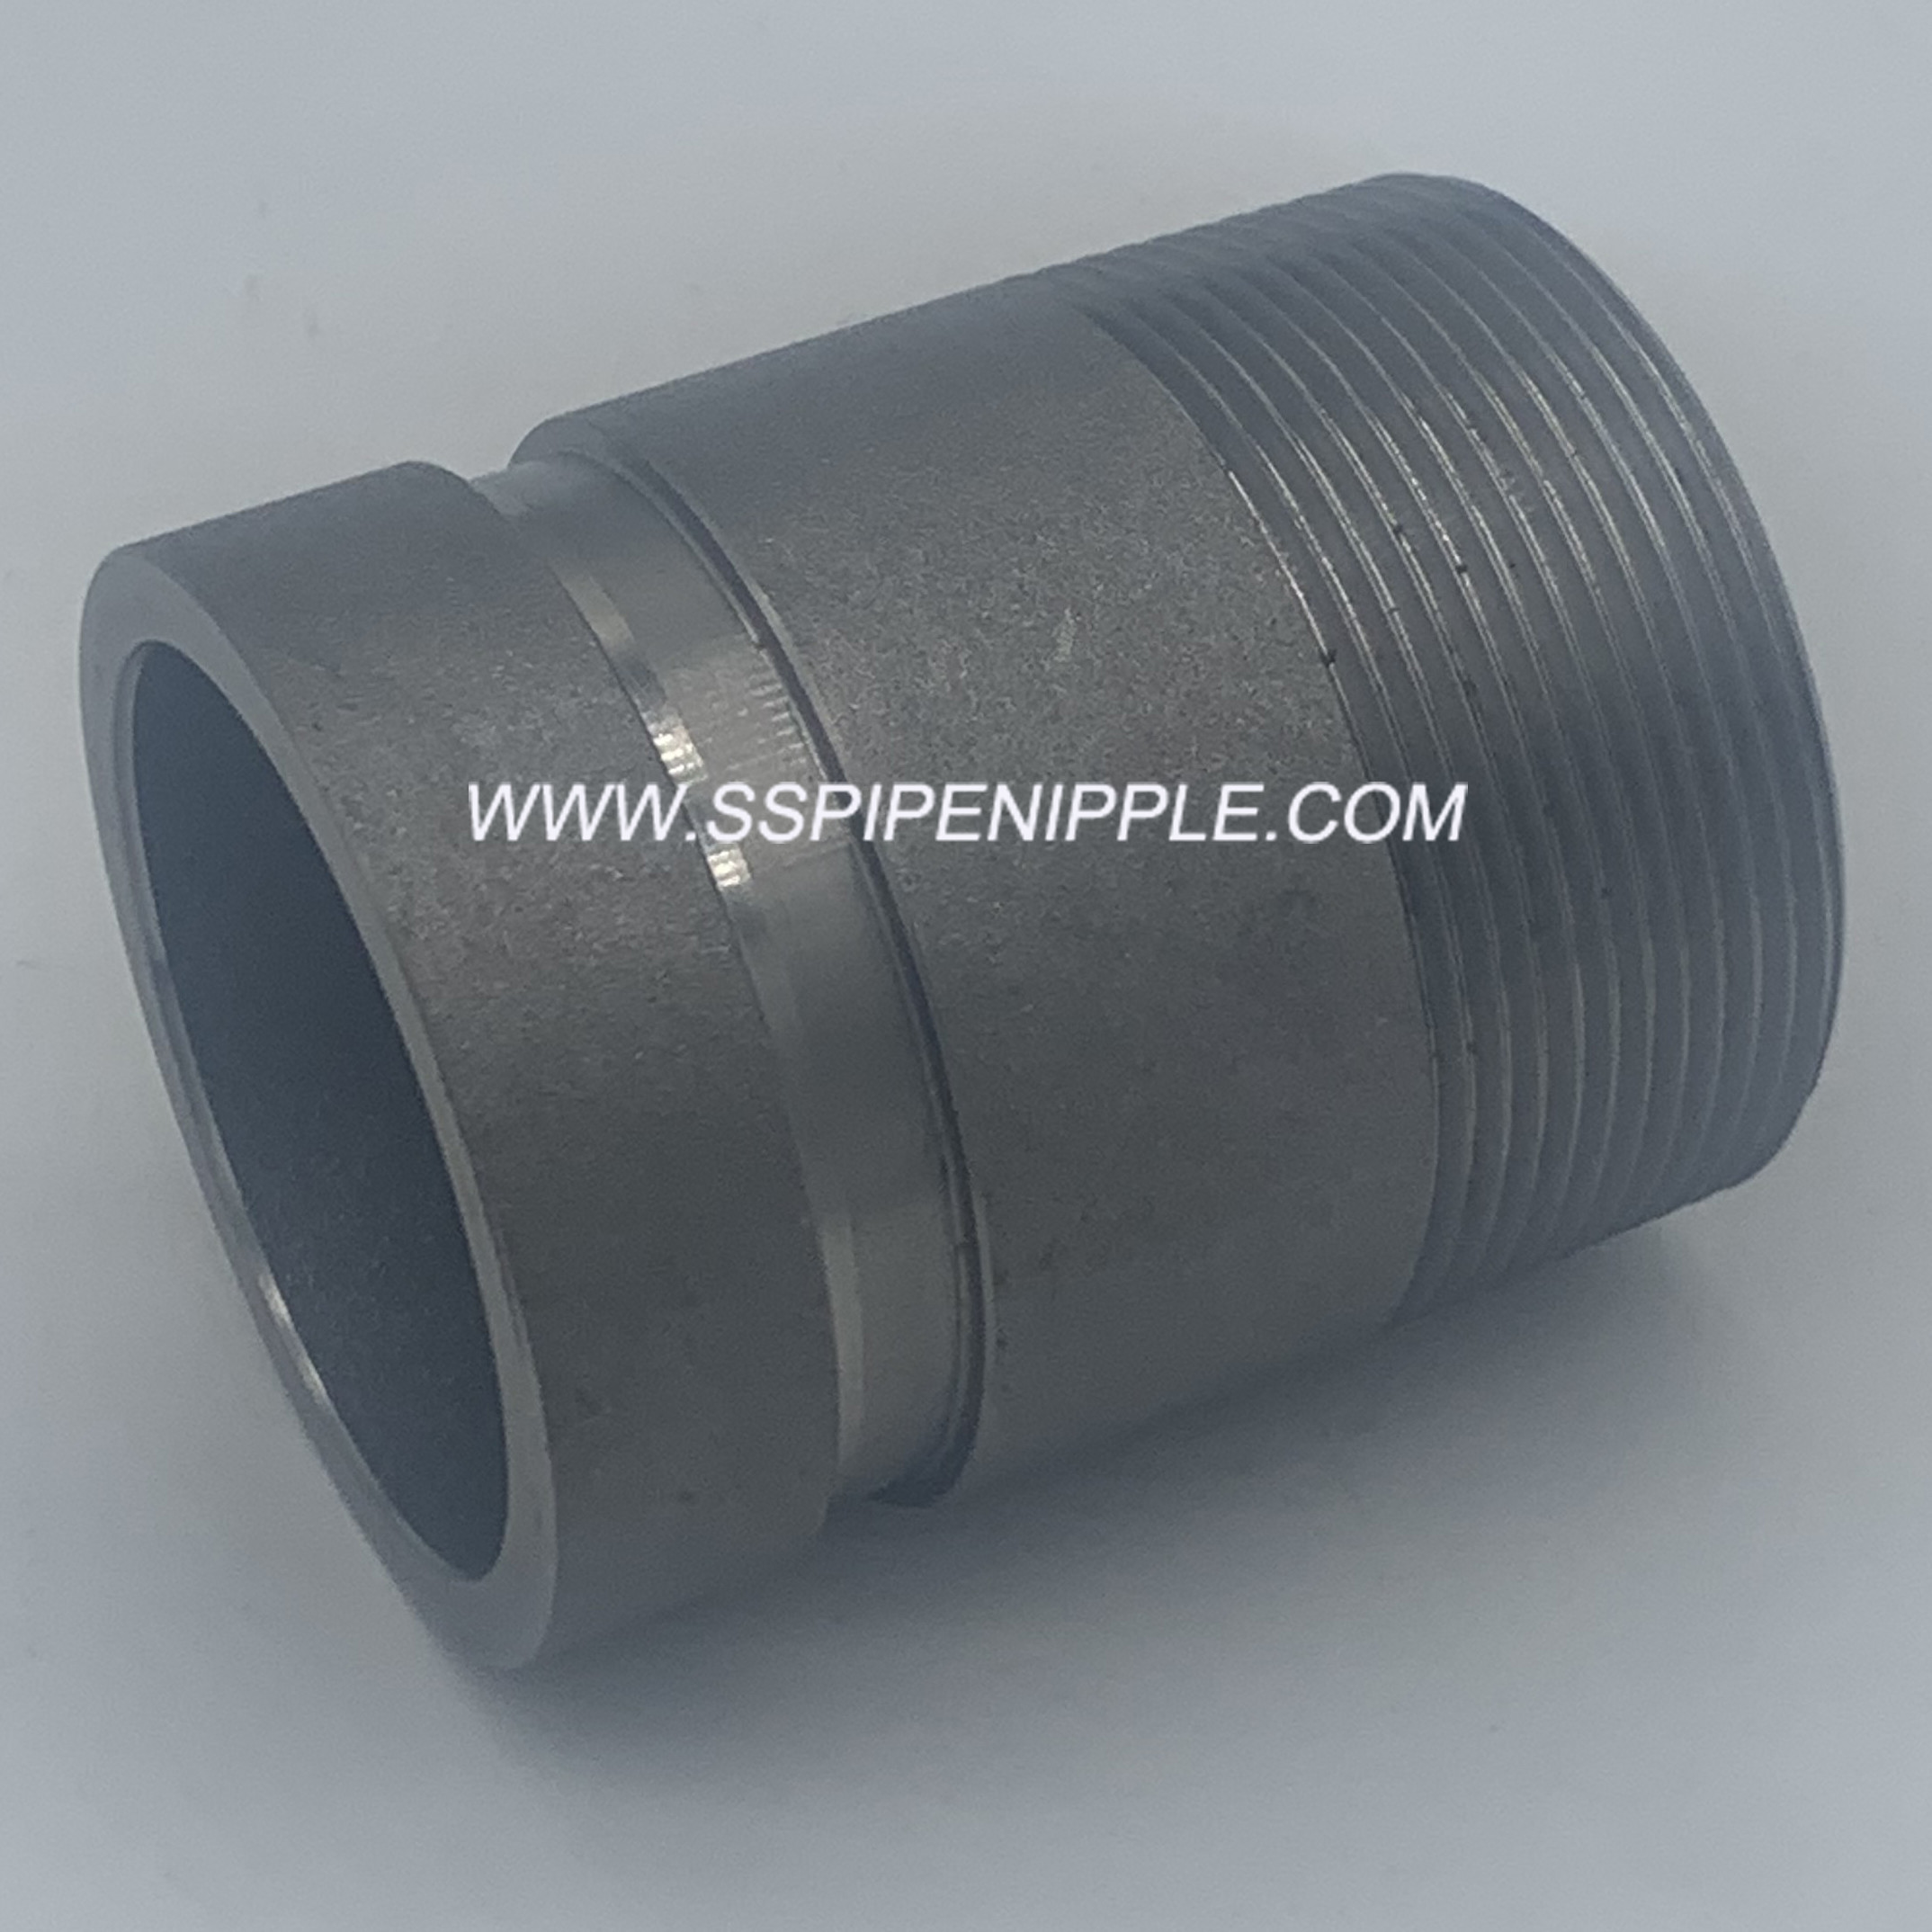 China Round 2X12 Grooved End Pipe Fittings SCH80 ASTM A106  ASME B1.20.1 on sale